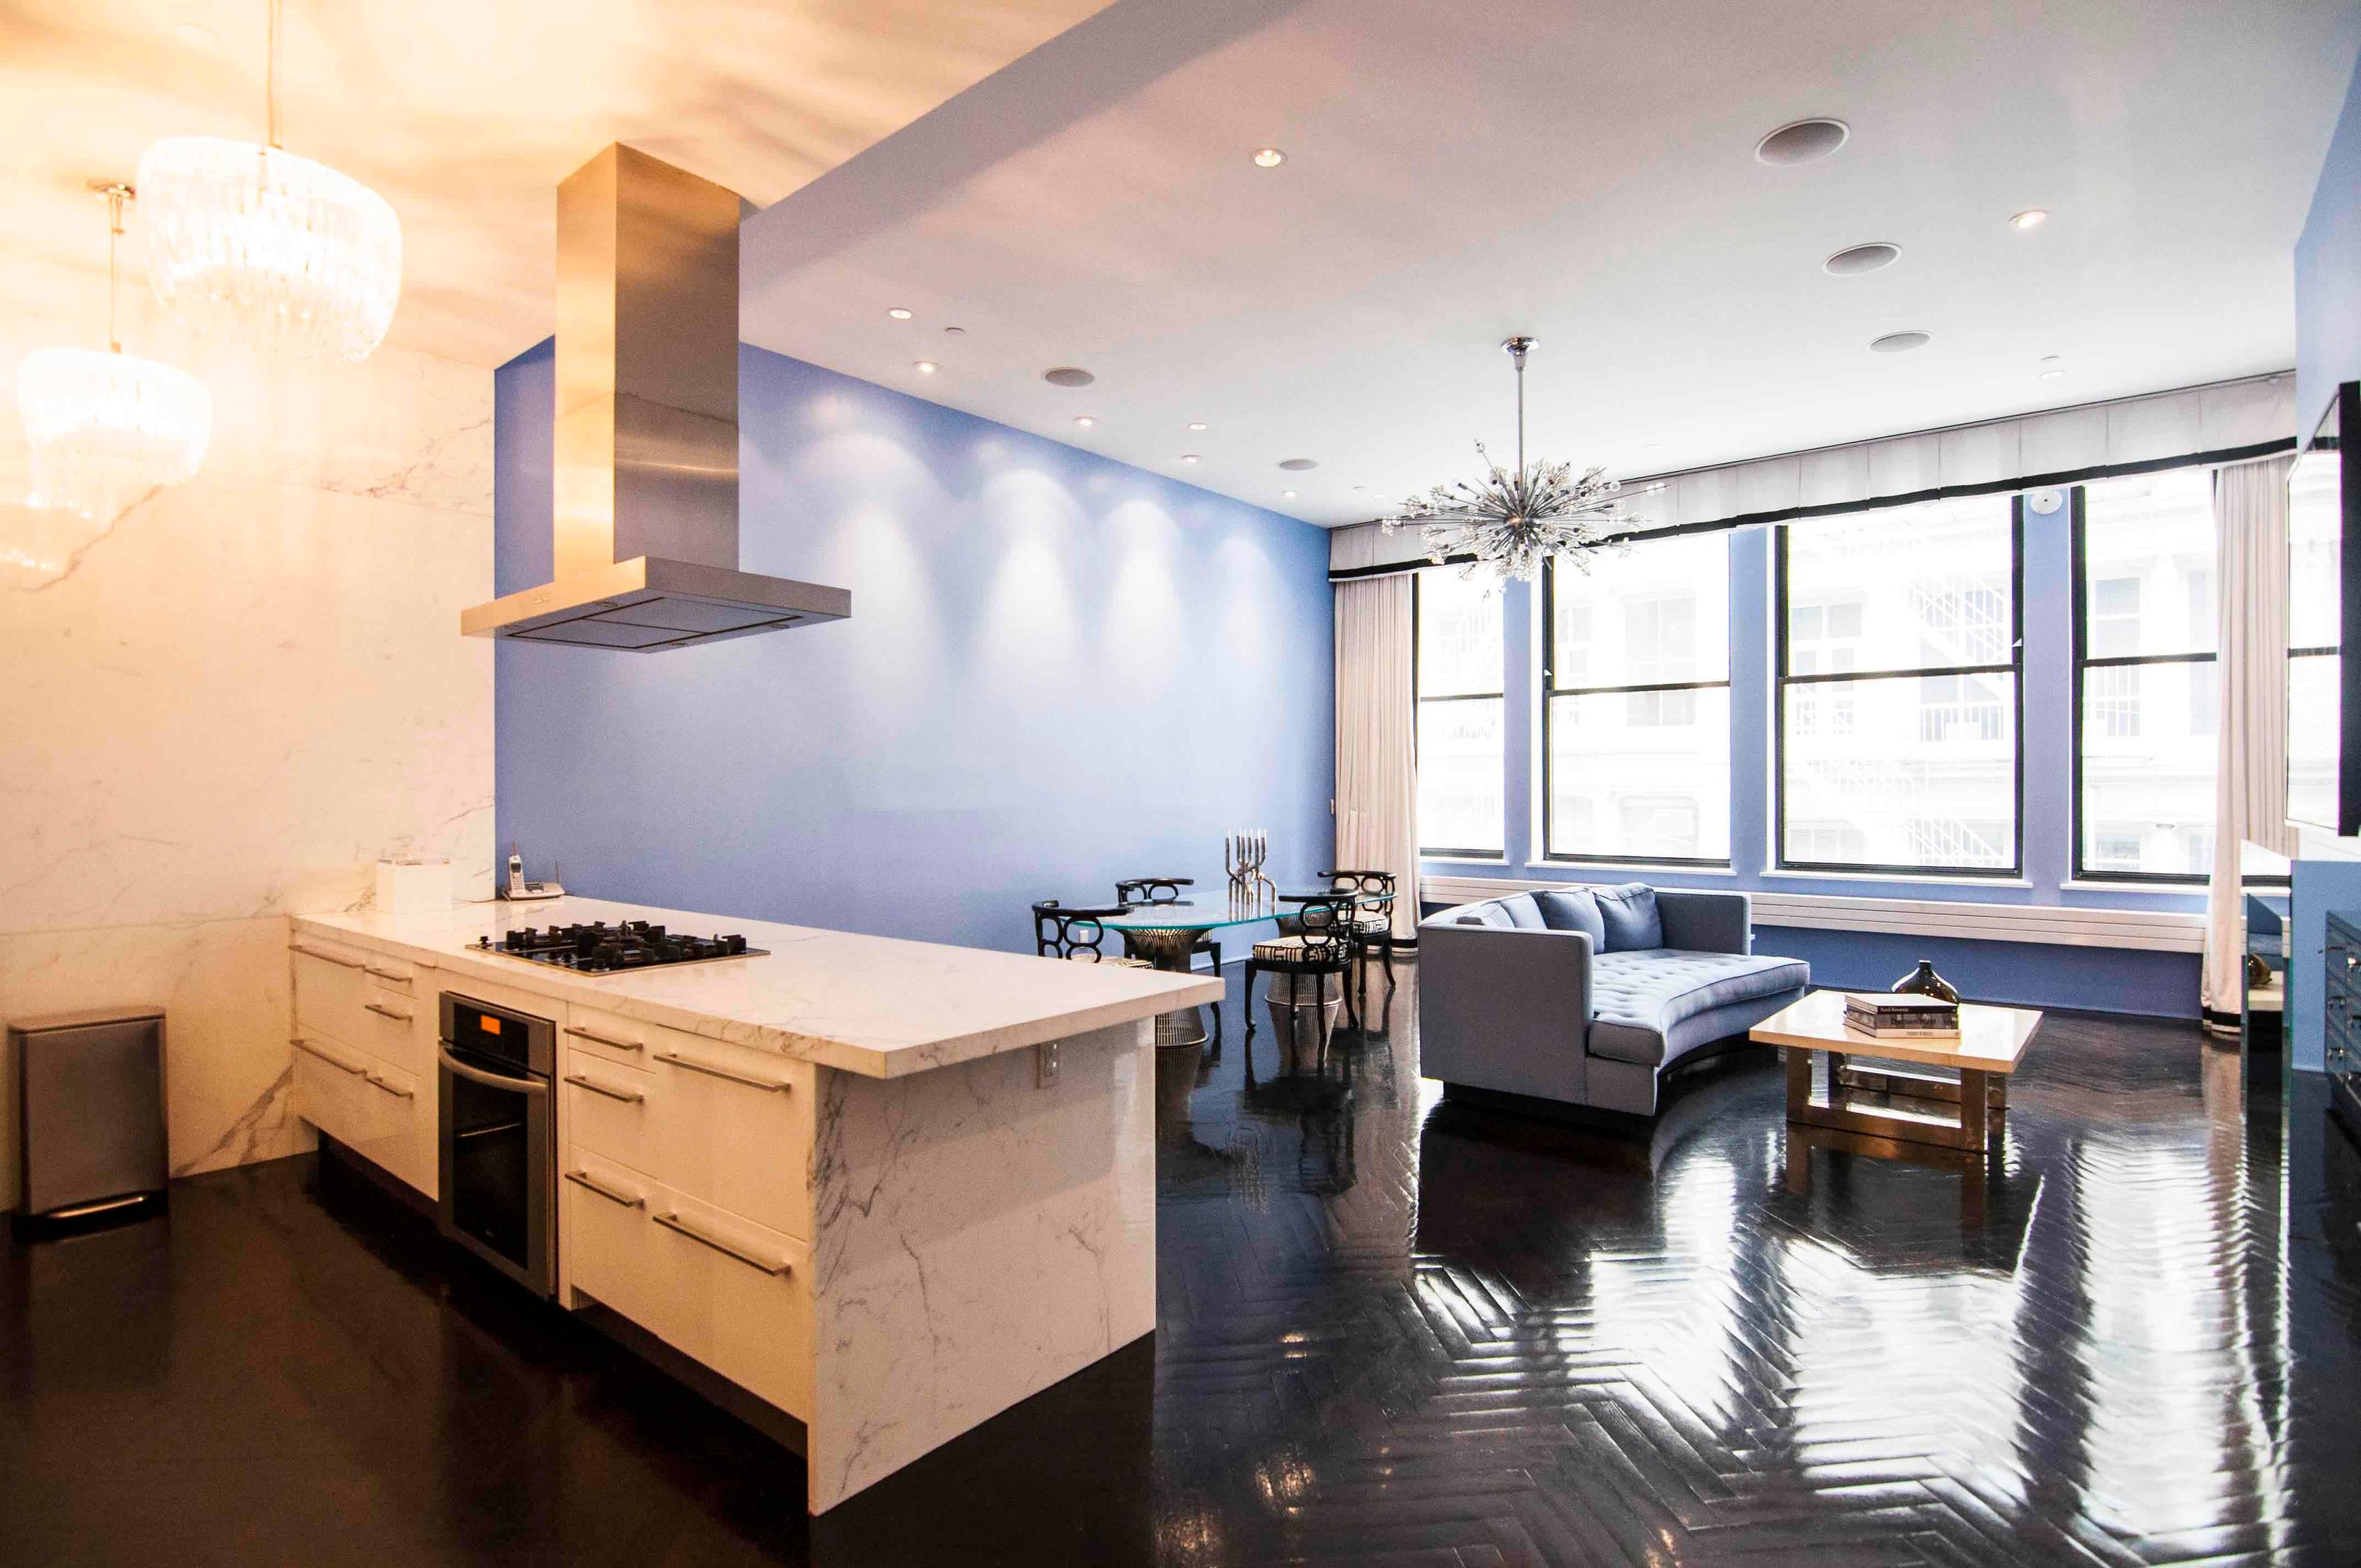 FURNISHED FULL SERVICE CONDO LOFT RENTAL IN THE HEART OF SOHO !